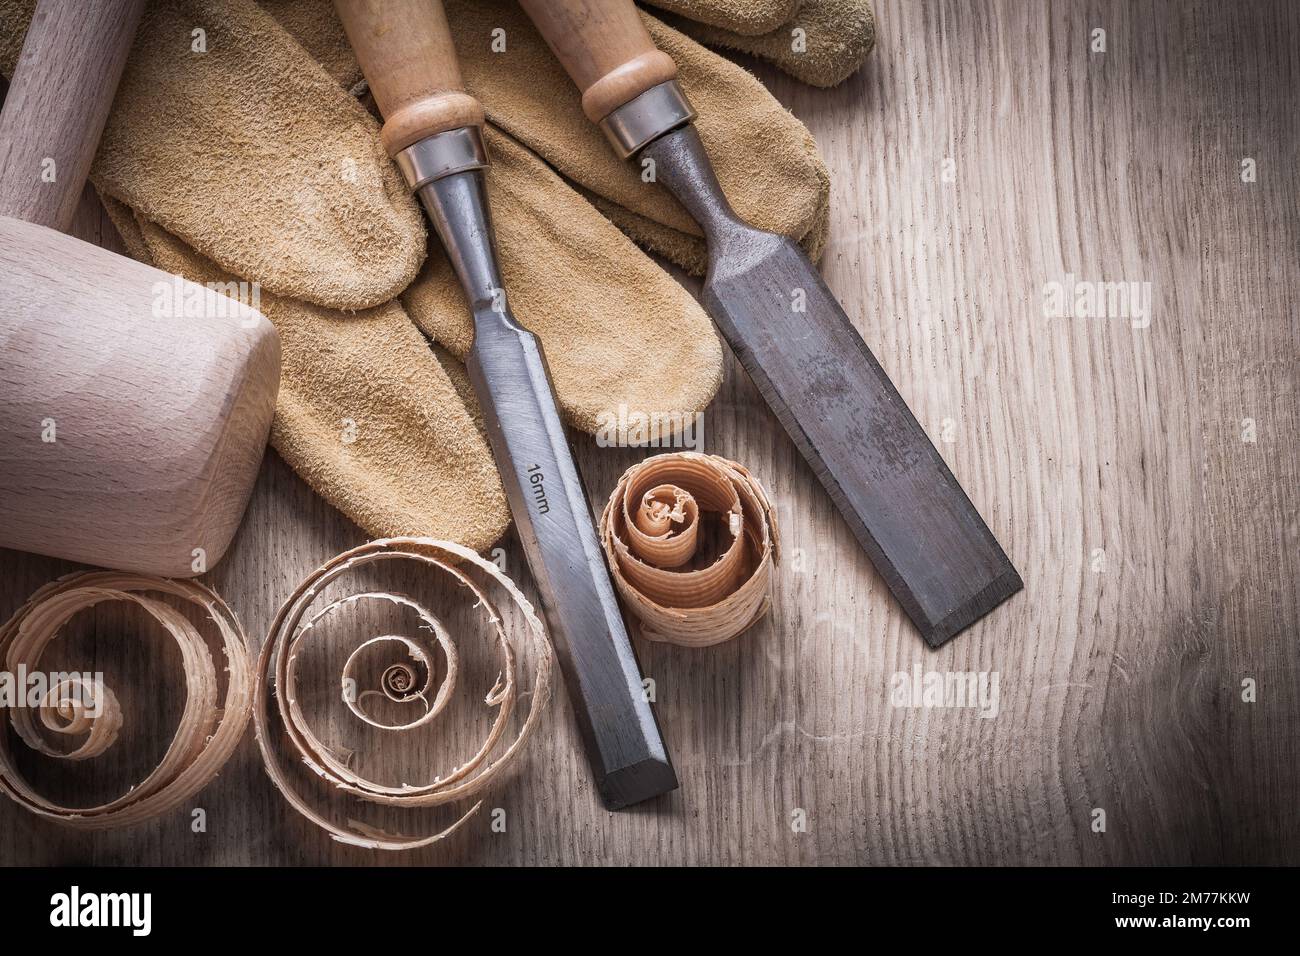 Wooden mallet curled up planning chips firmer chisels leather gloves on wood board construction concept. Stock Photo